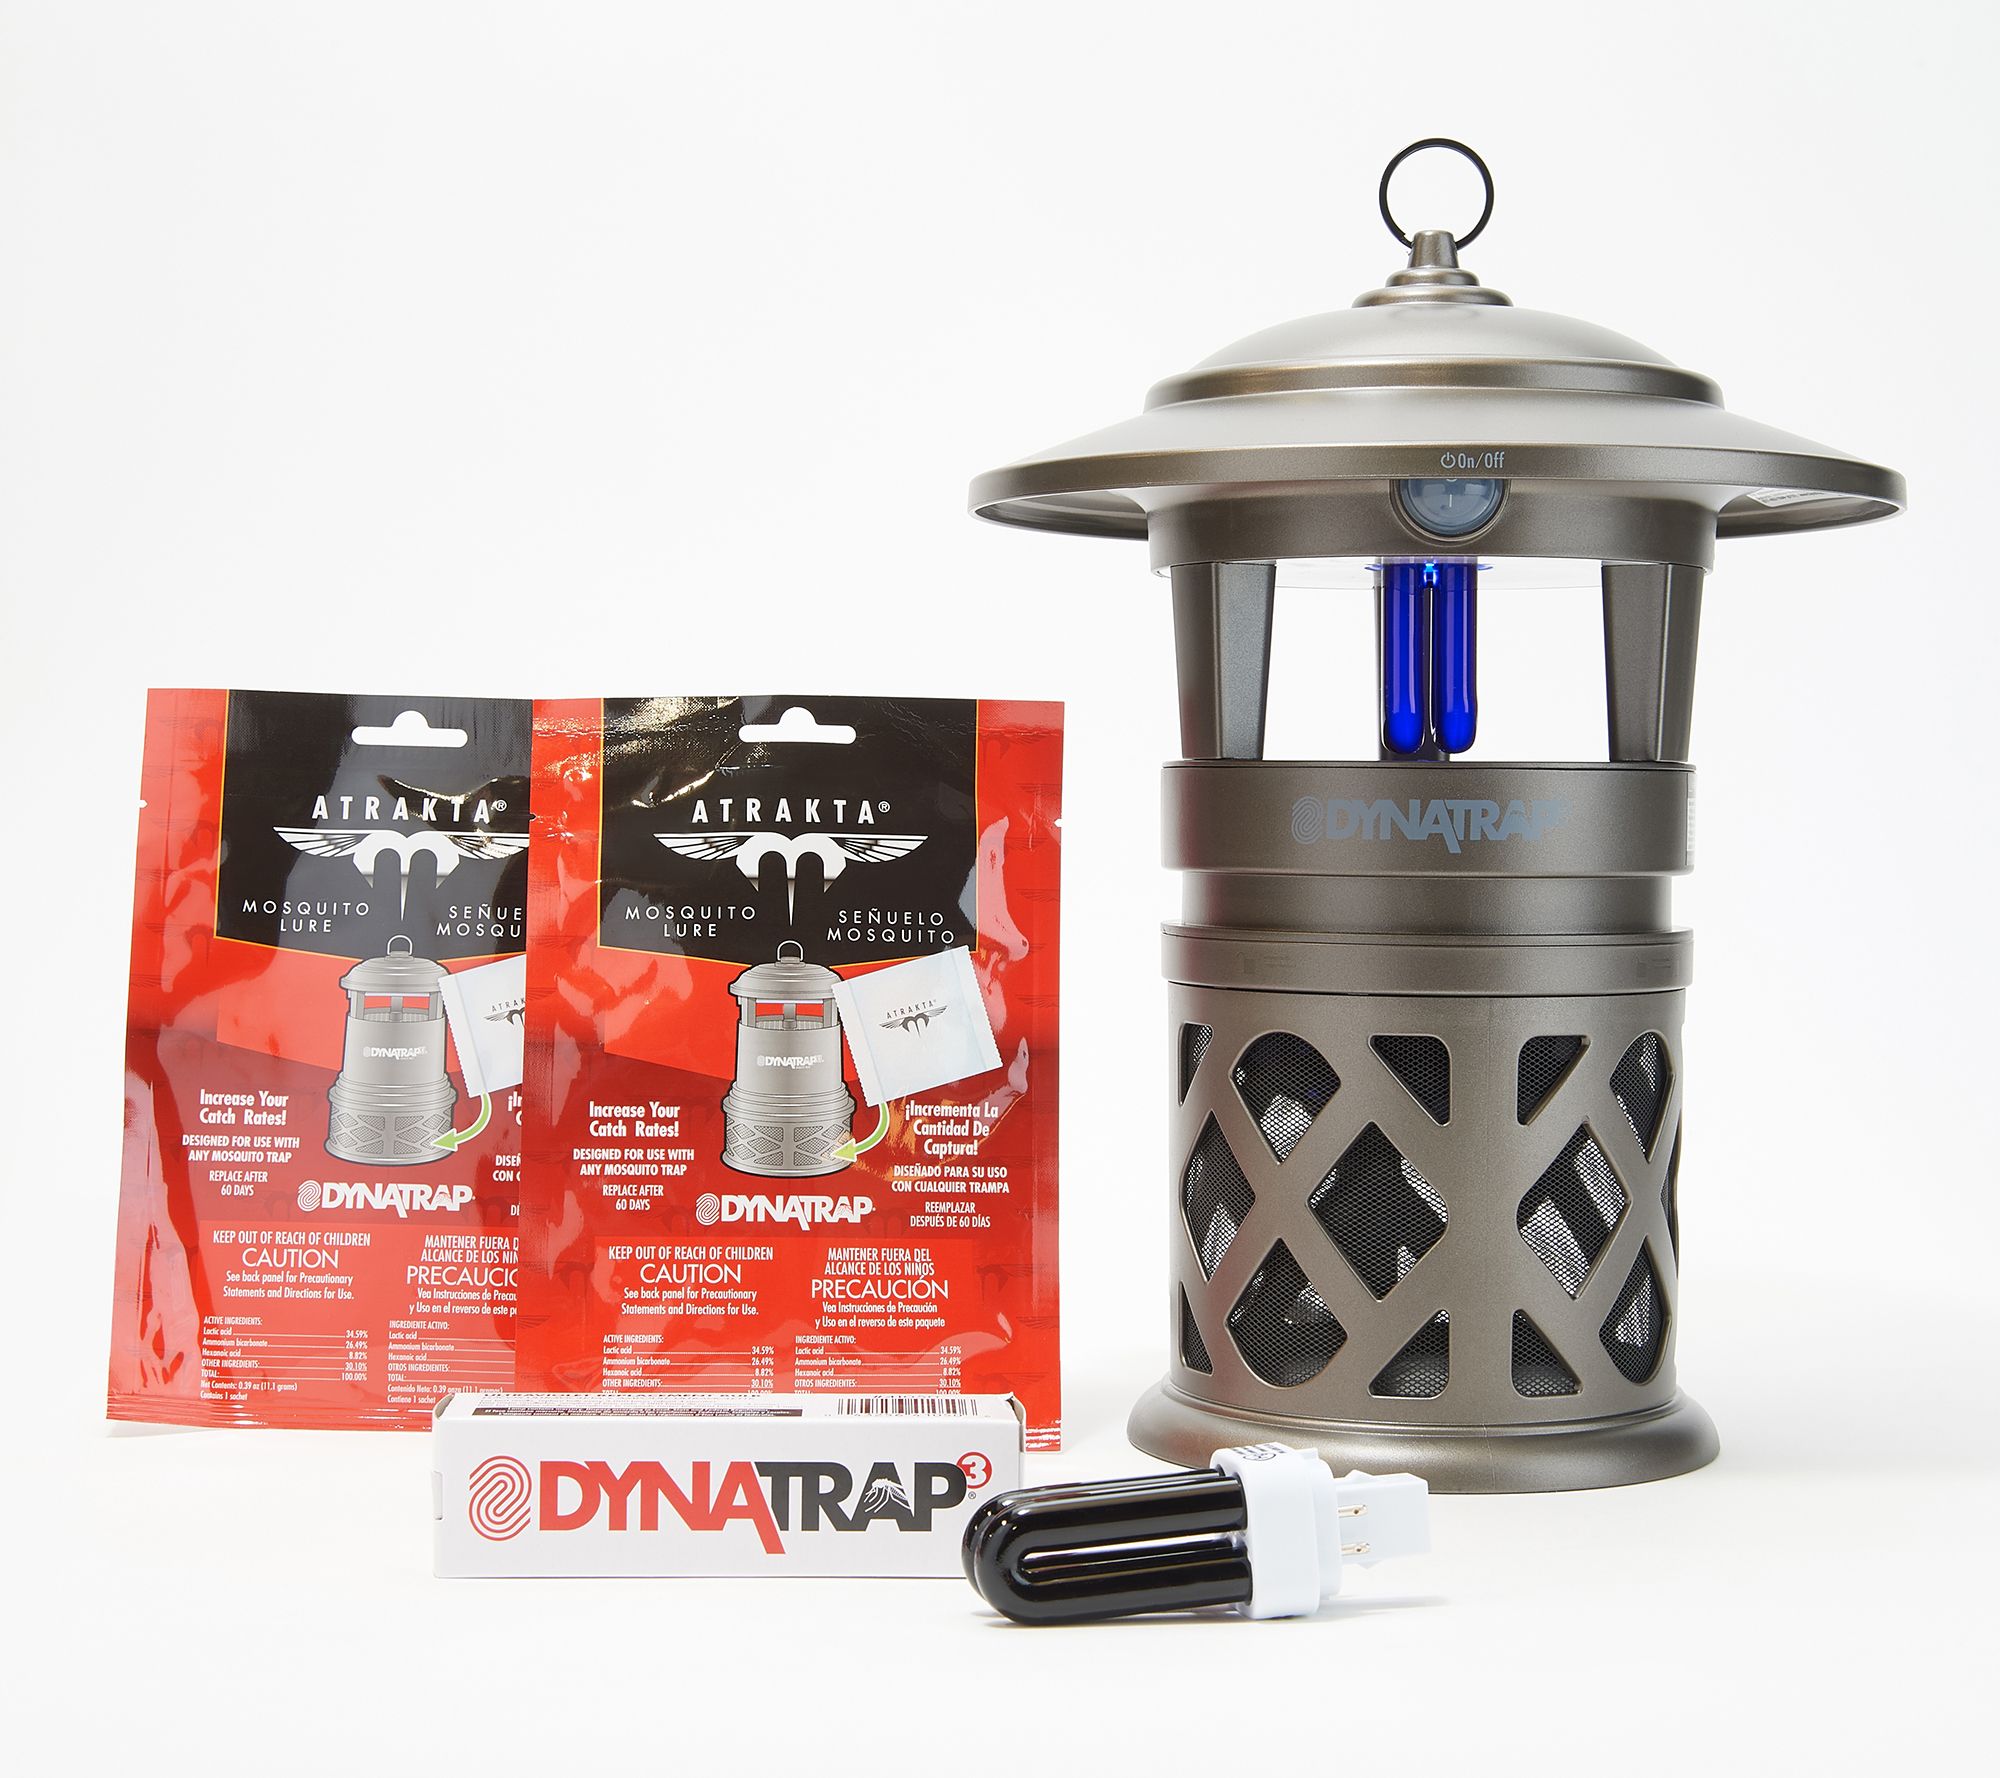 Dynatrap 1/2 Acre Copper Insect and Mosquito Trap with 2 Bulbs